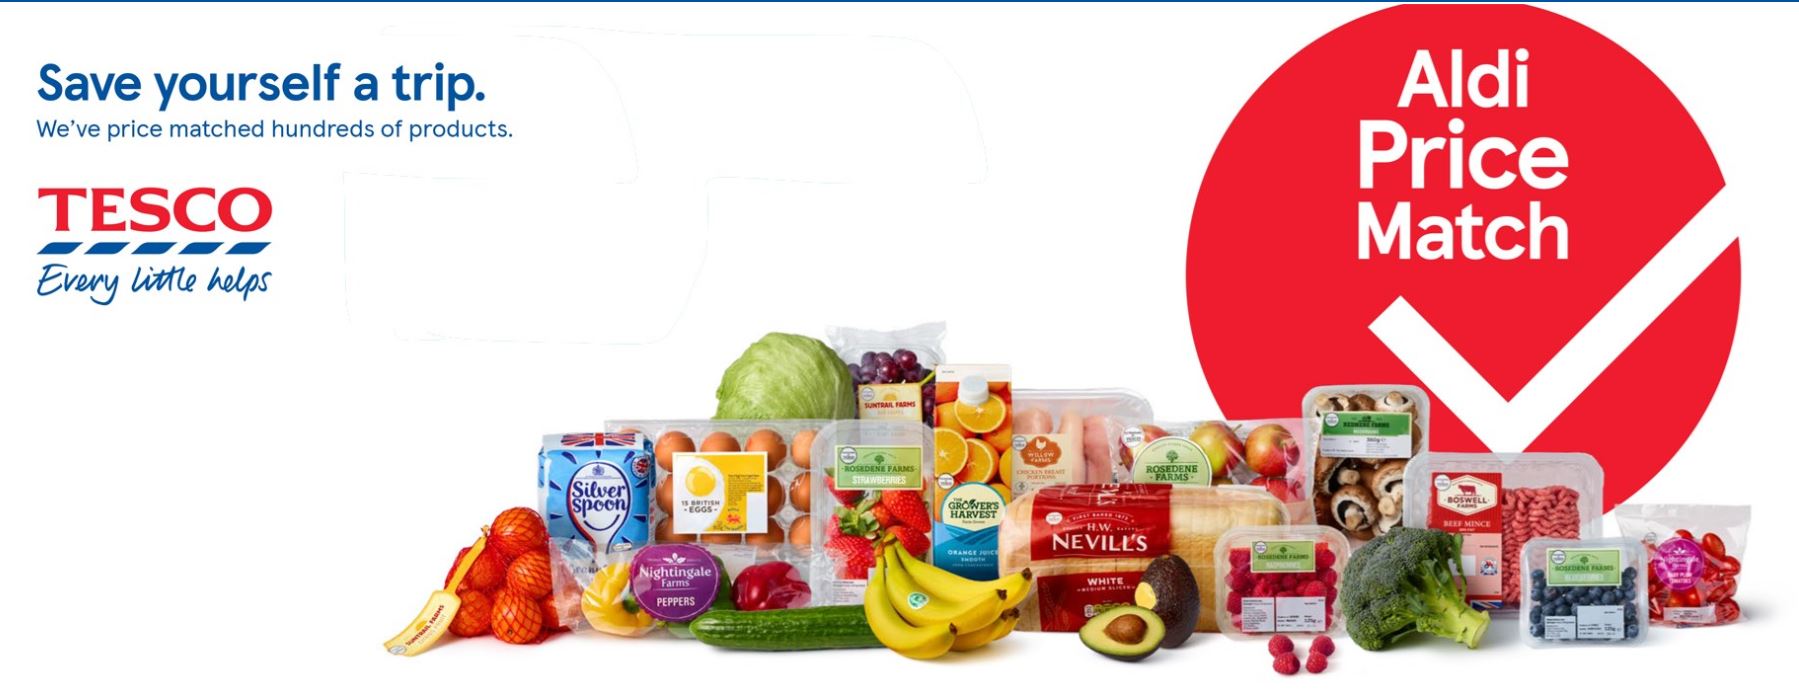 Tesco announced its initial price match campaign in March (Image: Tesco)